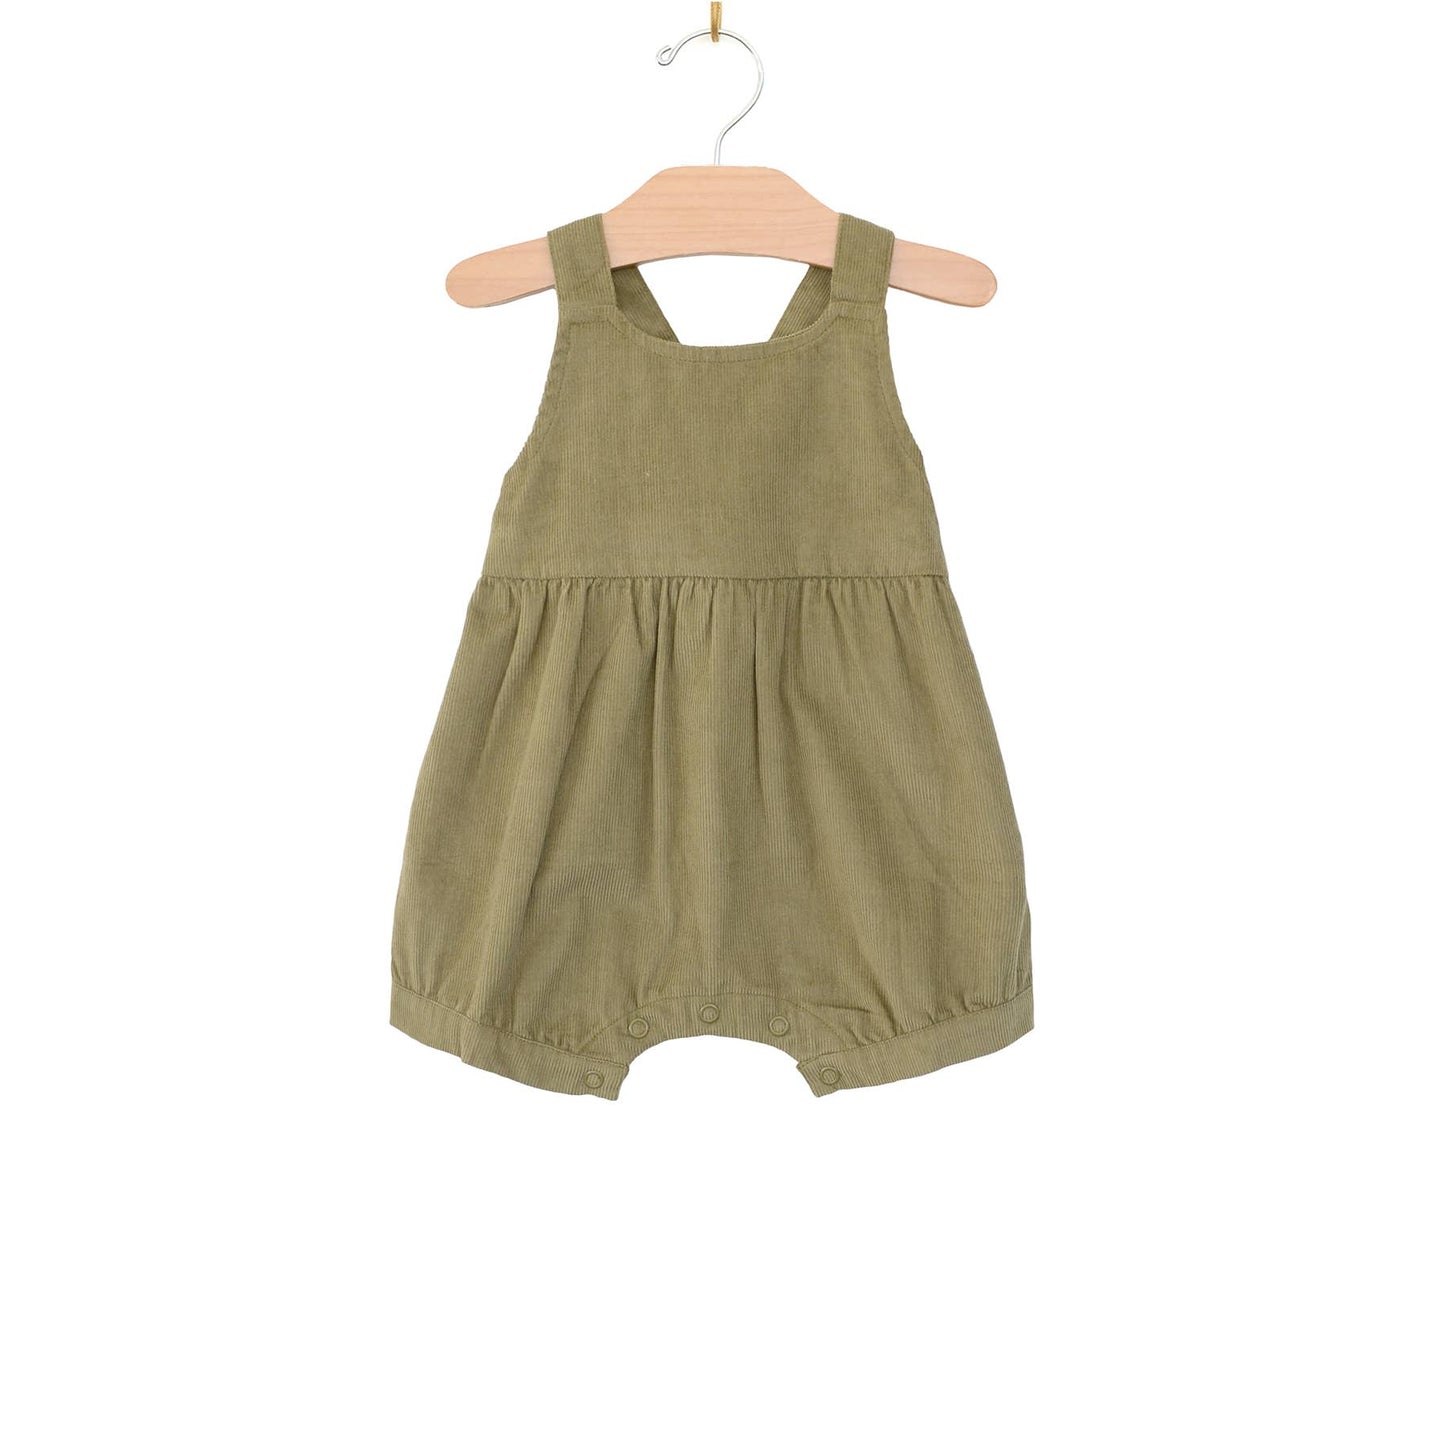 Corduroy Shortie Gathered Romper: Olive